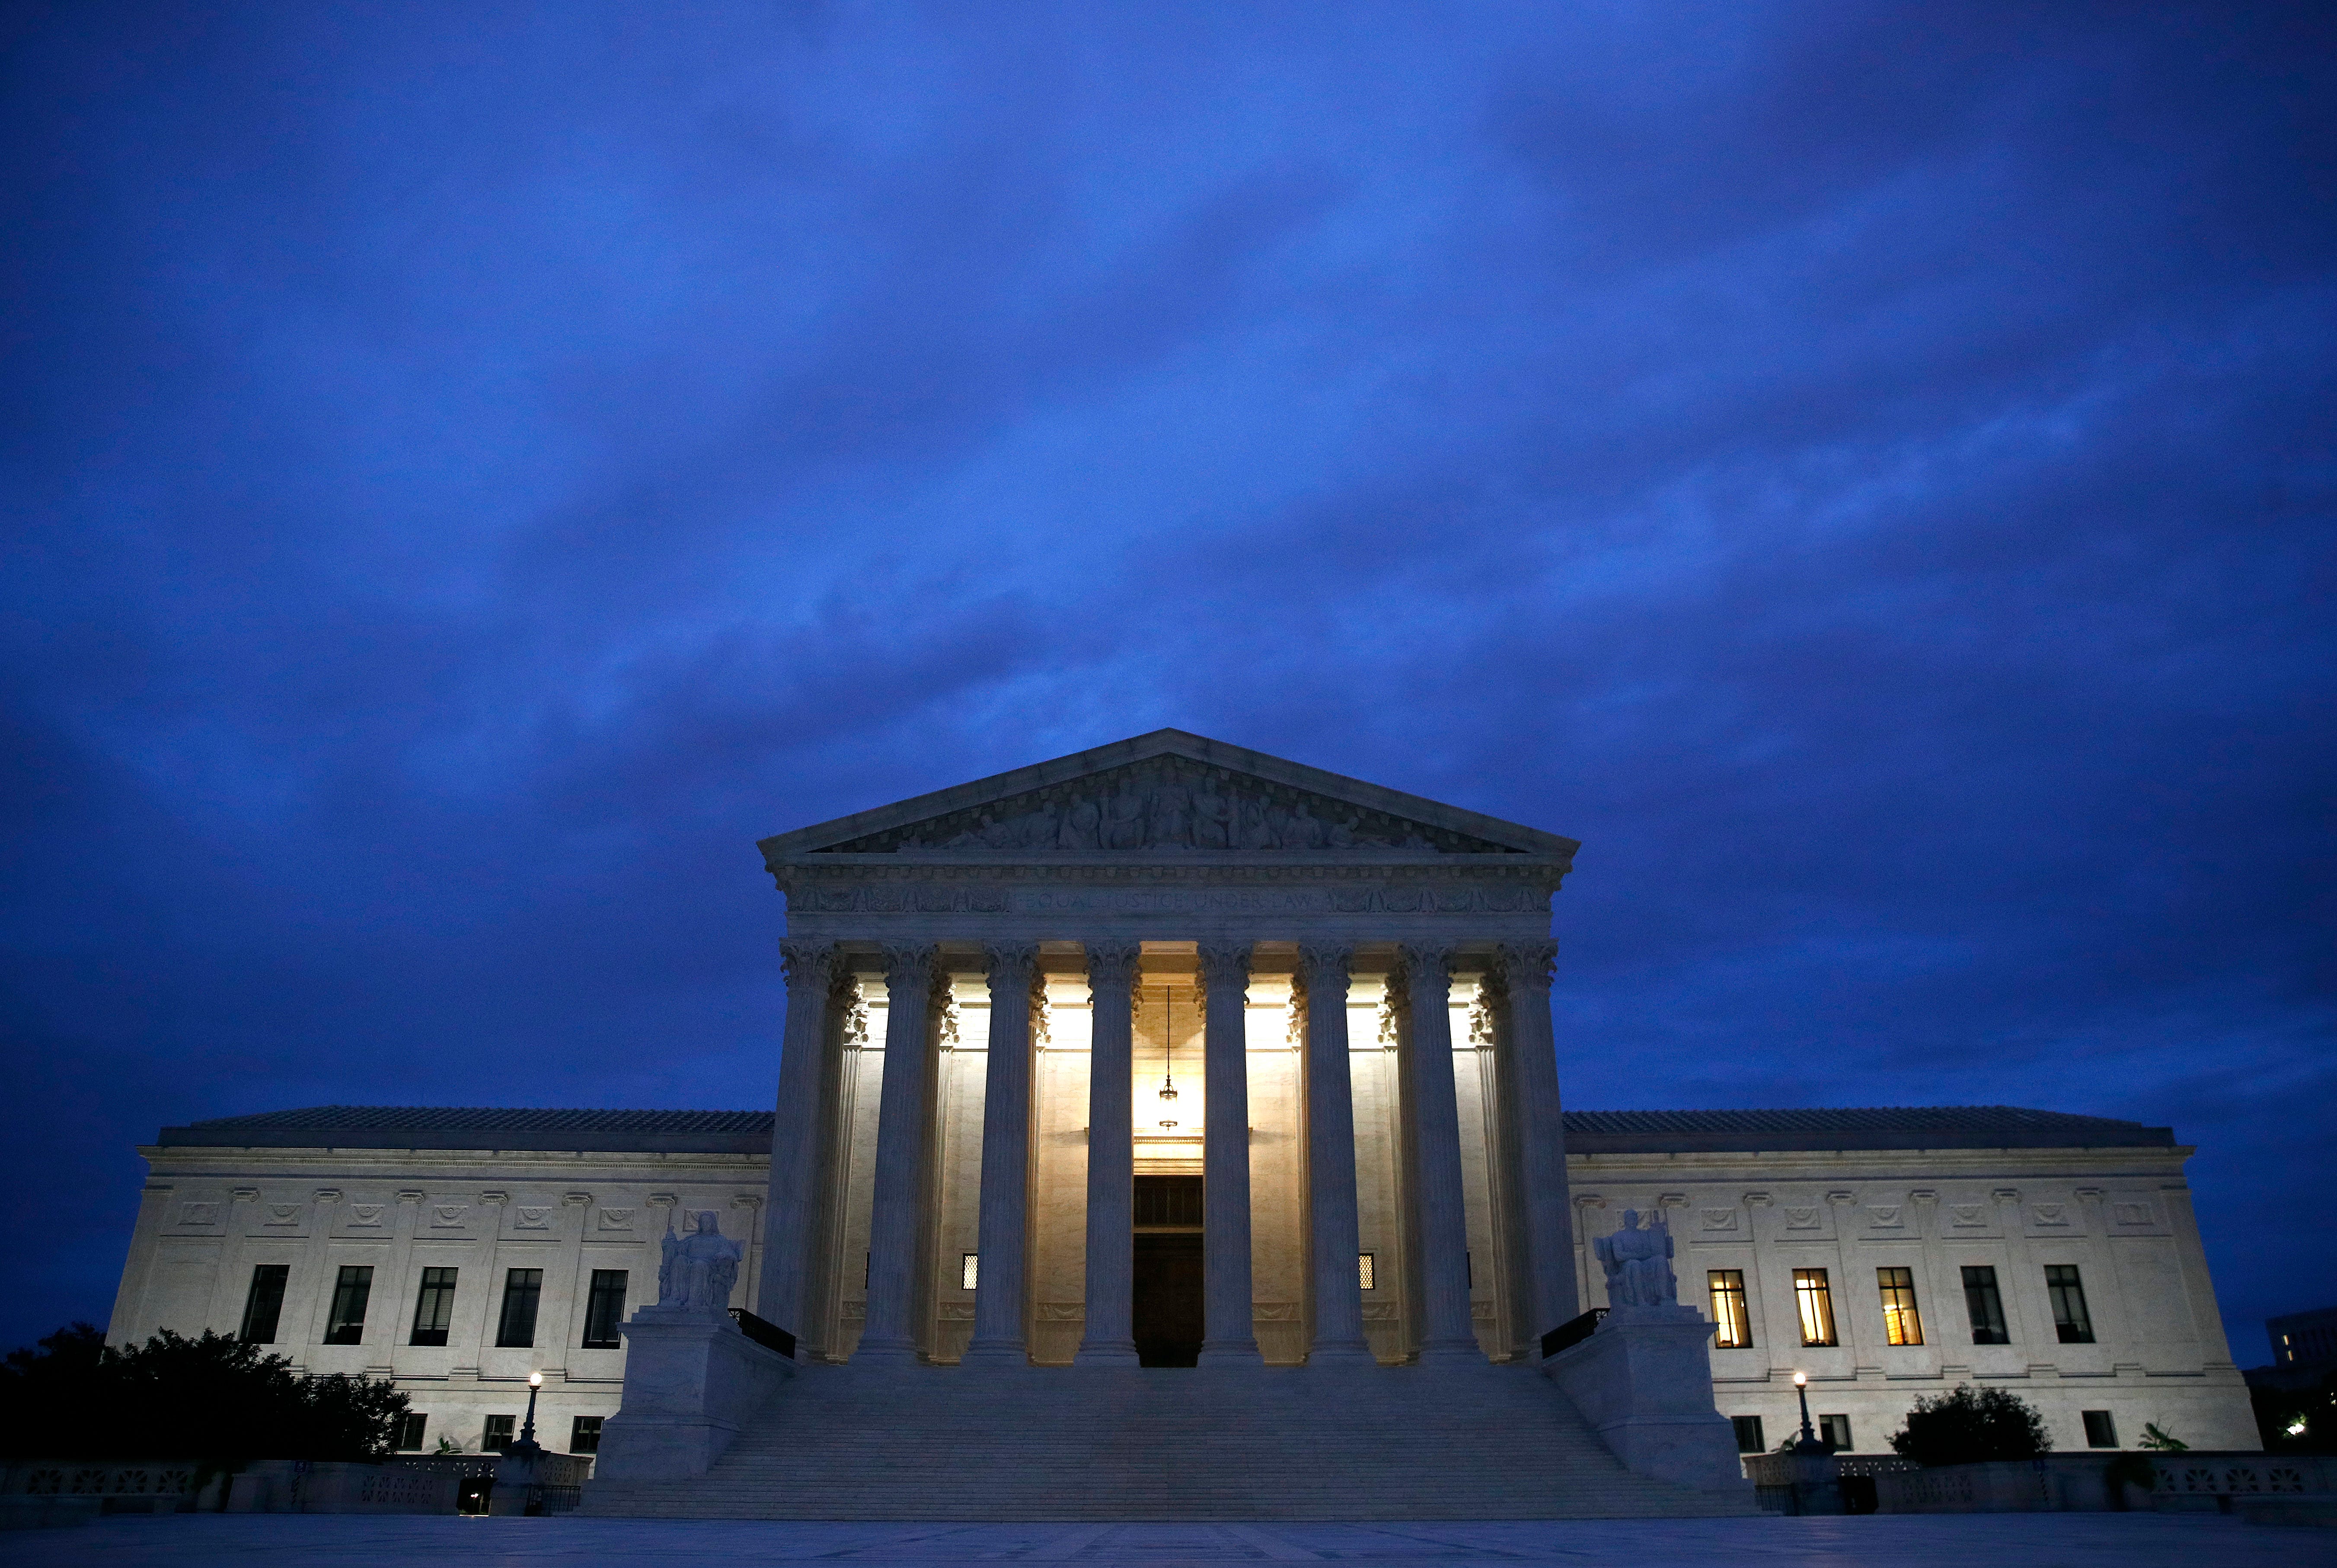 The Supreme Court building is seen at dawn on Capitol Hill in Washington, Sept. 27, 2018. The Senate Judiciary Committee is scheduled to hear from Supreme Court nominee Brett Kavanaugh and Christine Blasey Ford, the woman who says he sexually assault